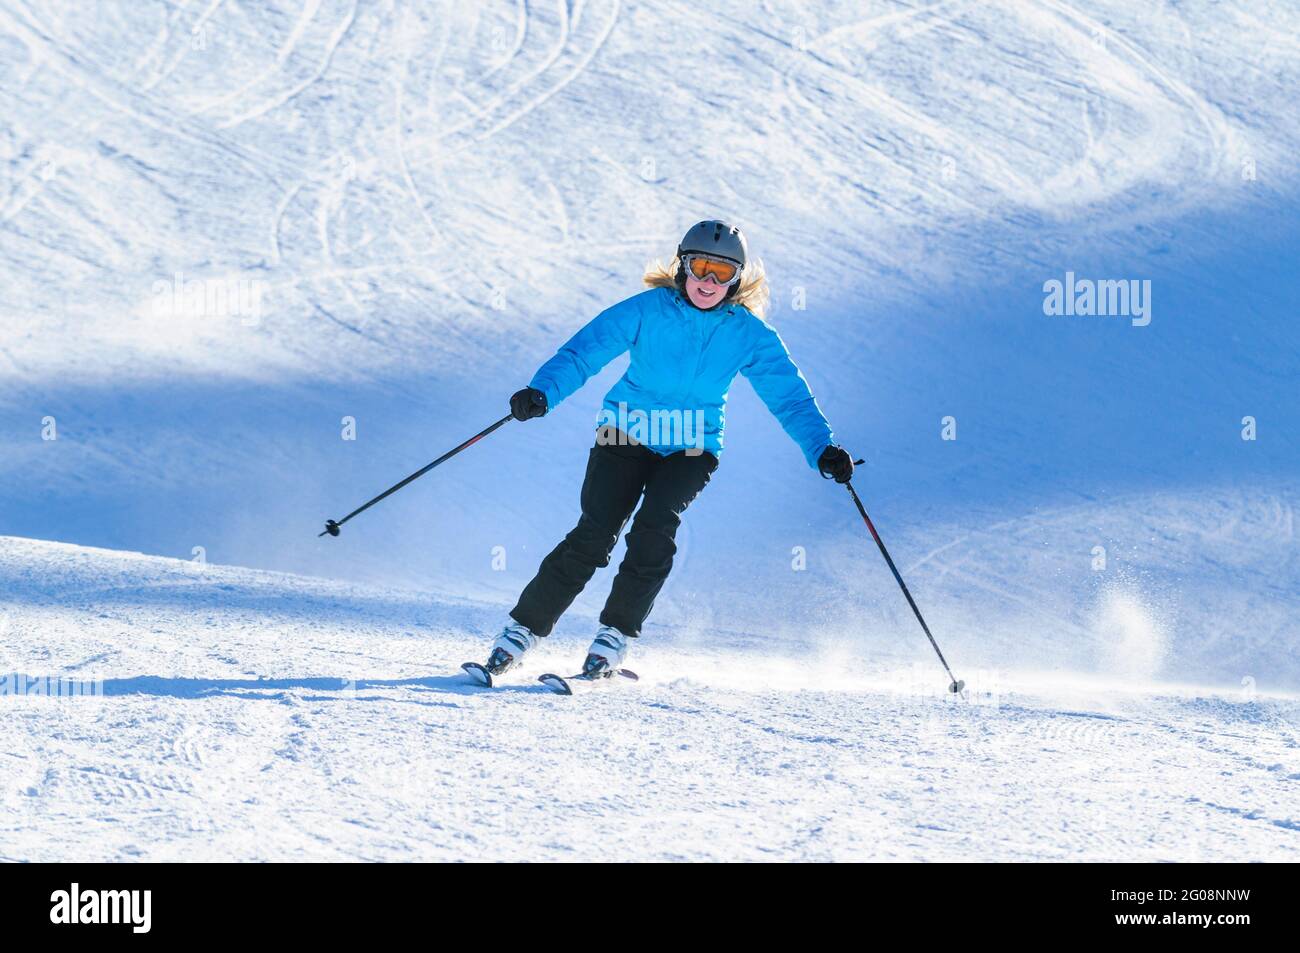 Young woman skiing on slope Stock Photo